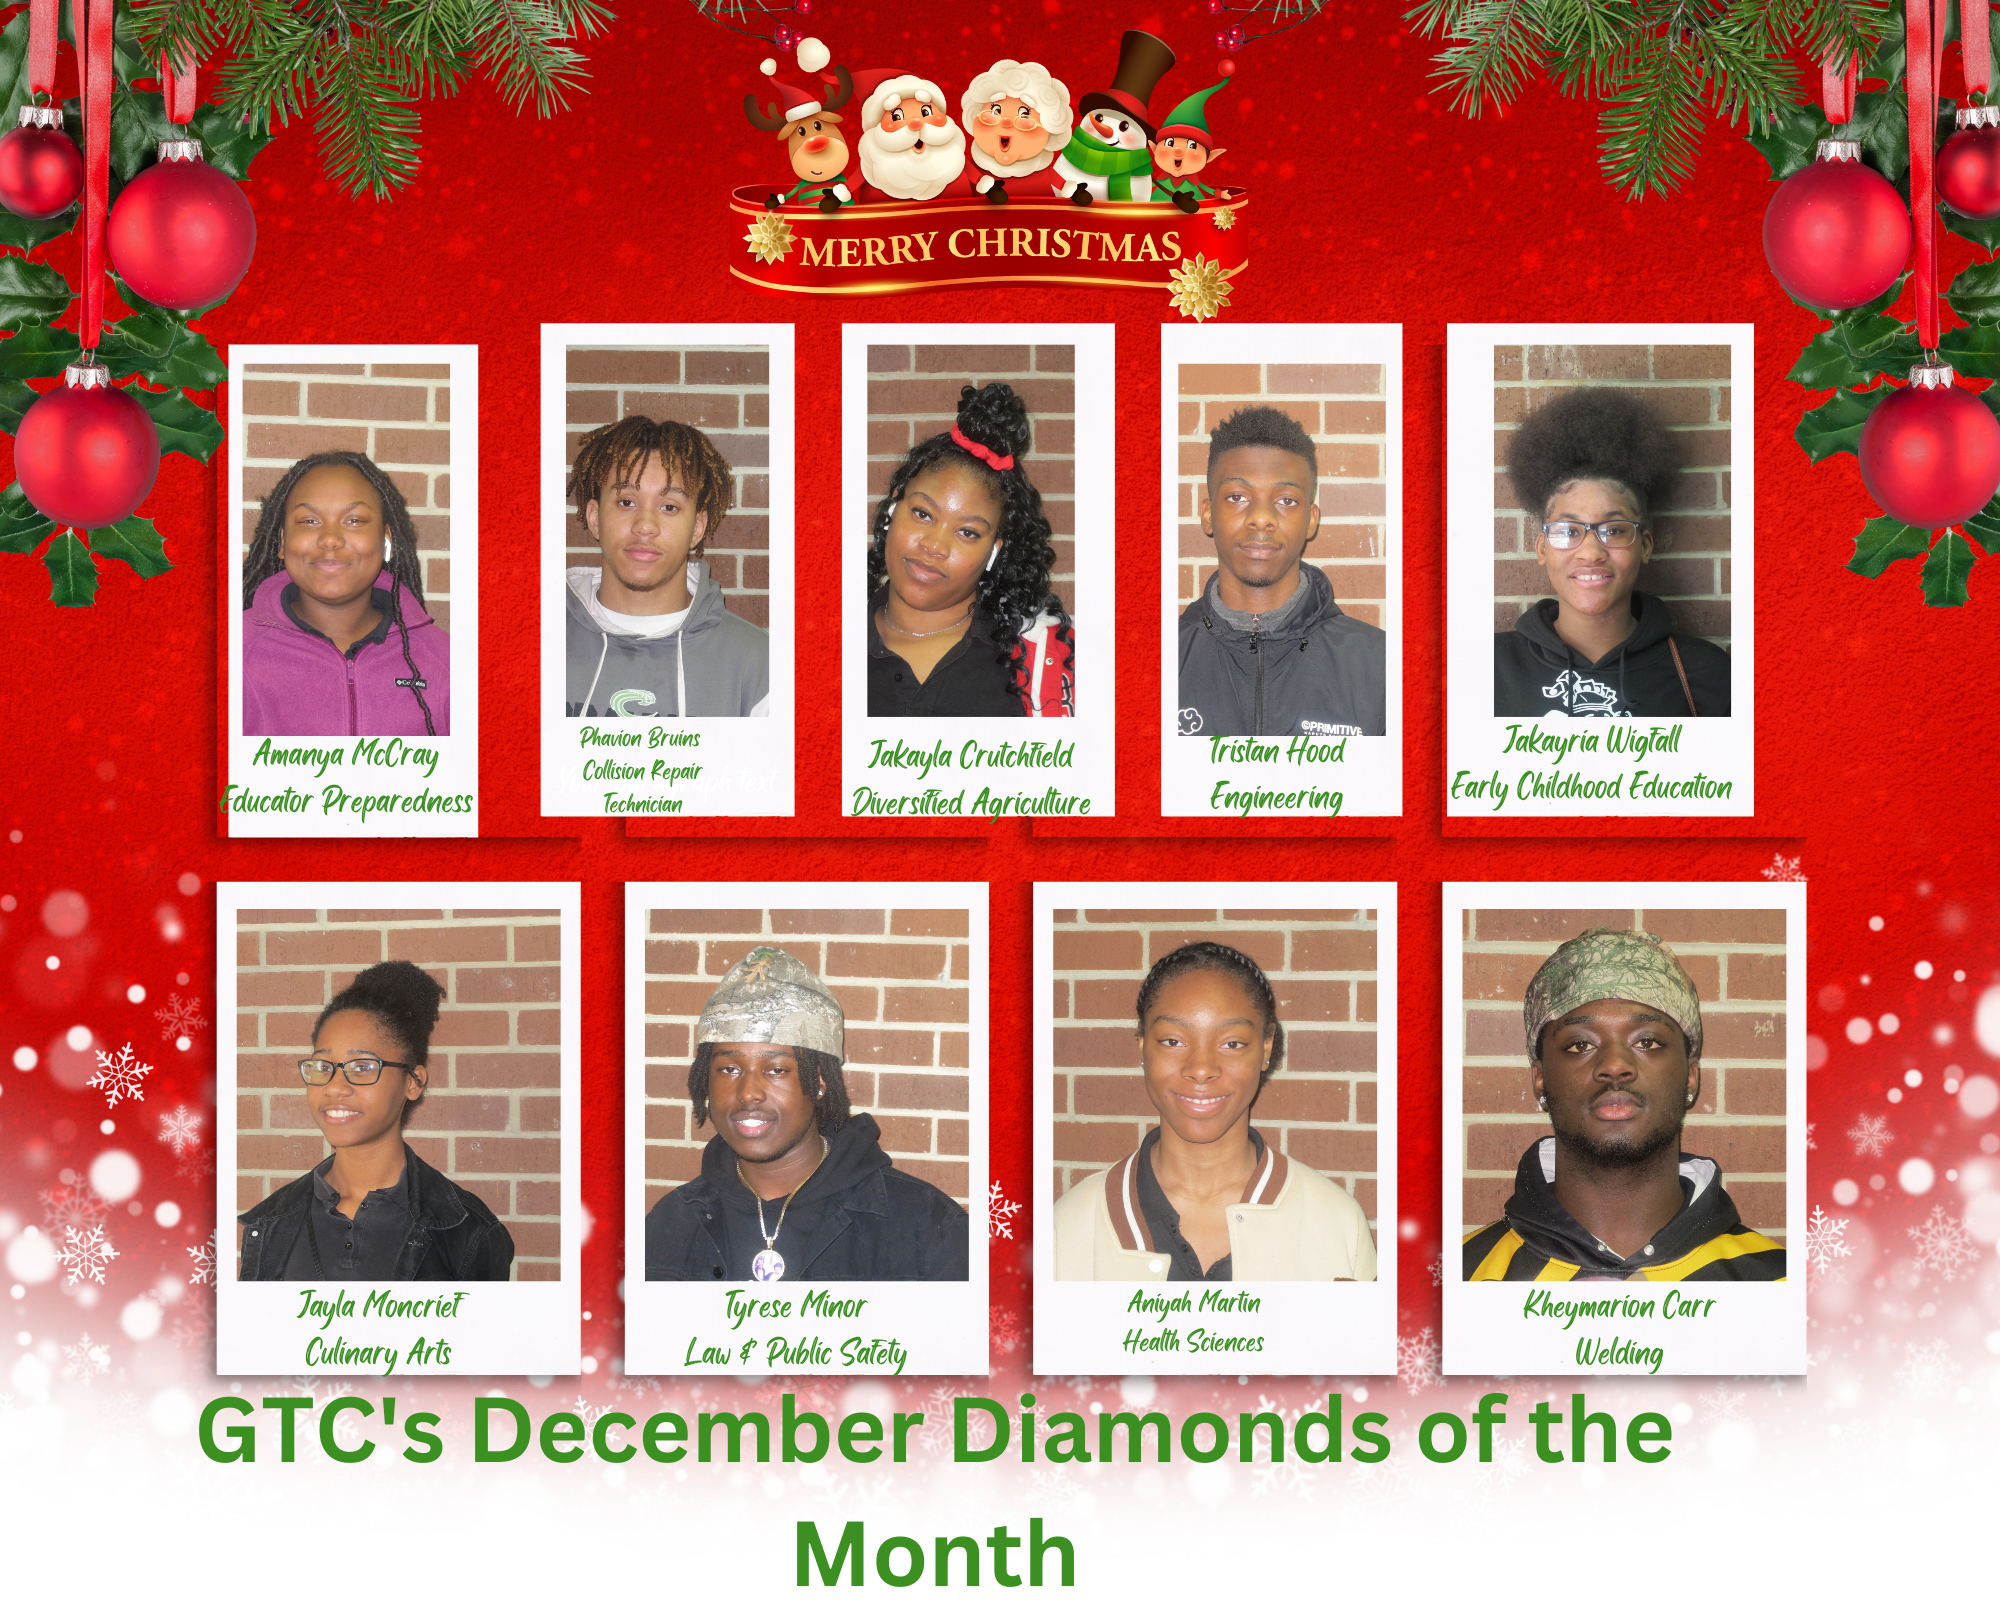 December Students of the Month Amanya McCray, Educator Preparedness; Phavion Bruins, Collision Repair Technician; Jakayria Wigfall, Early Childhood Education; Jakayla Crutchfield, Diversified Agriculture; Jayla Moncrief, Culinary Arts; Tyrese Minor, Law & Public Safety; Tristan Hood, Engineering; Kheymarion Carr, Welding, Aniyah Martin, Health Sciences, & Kaniya Hughes, Work Based Learning